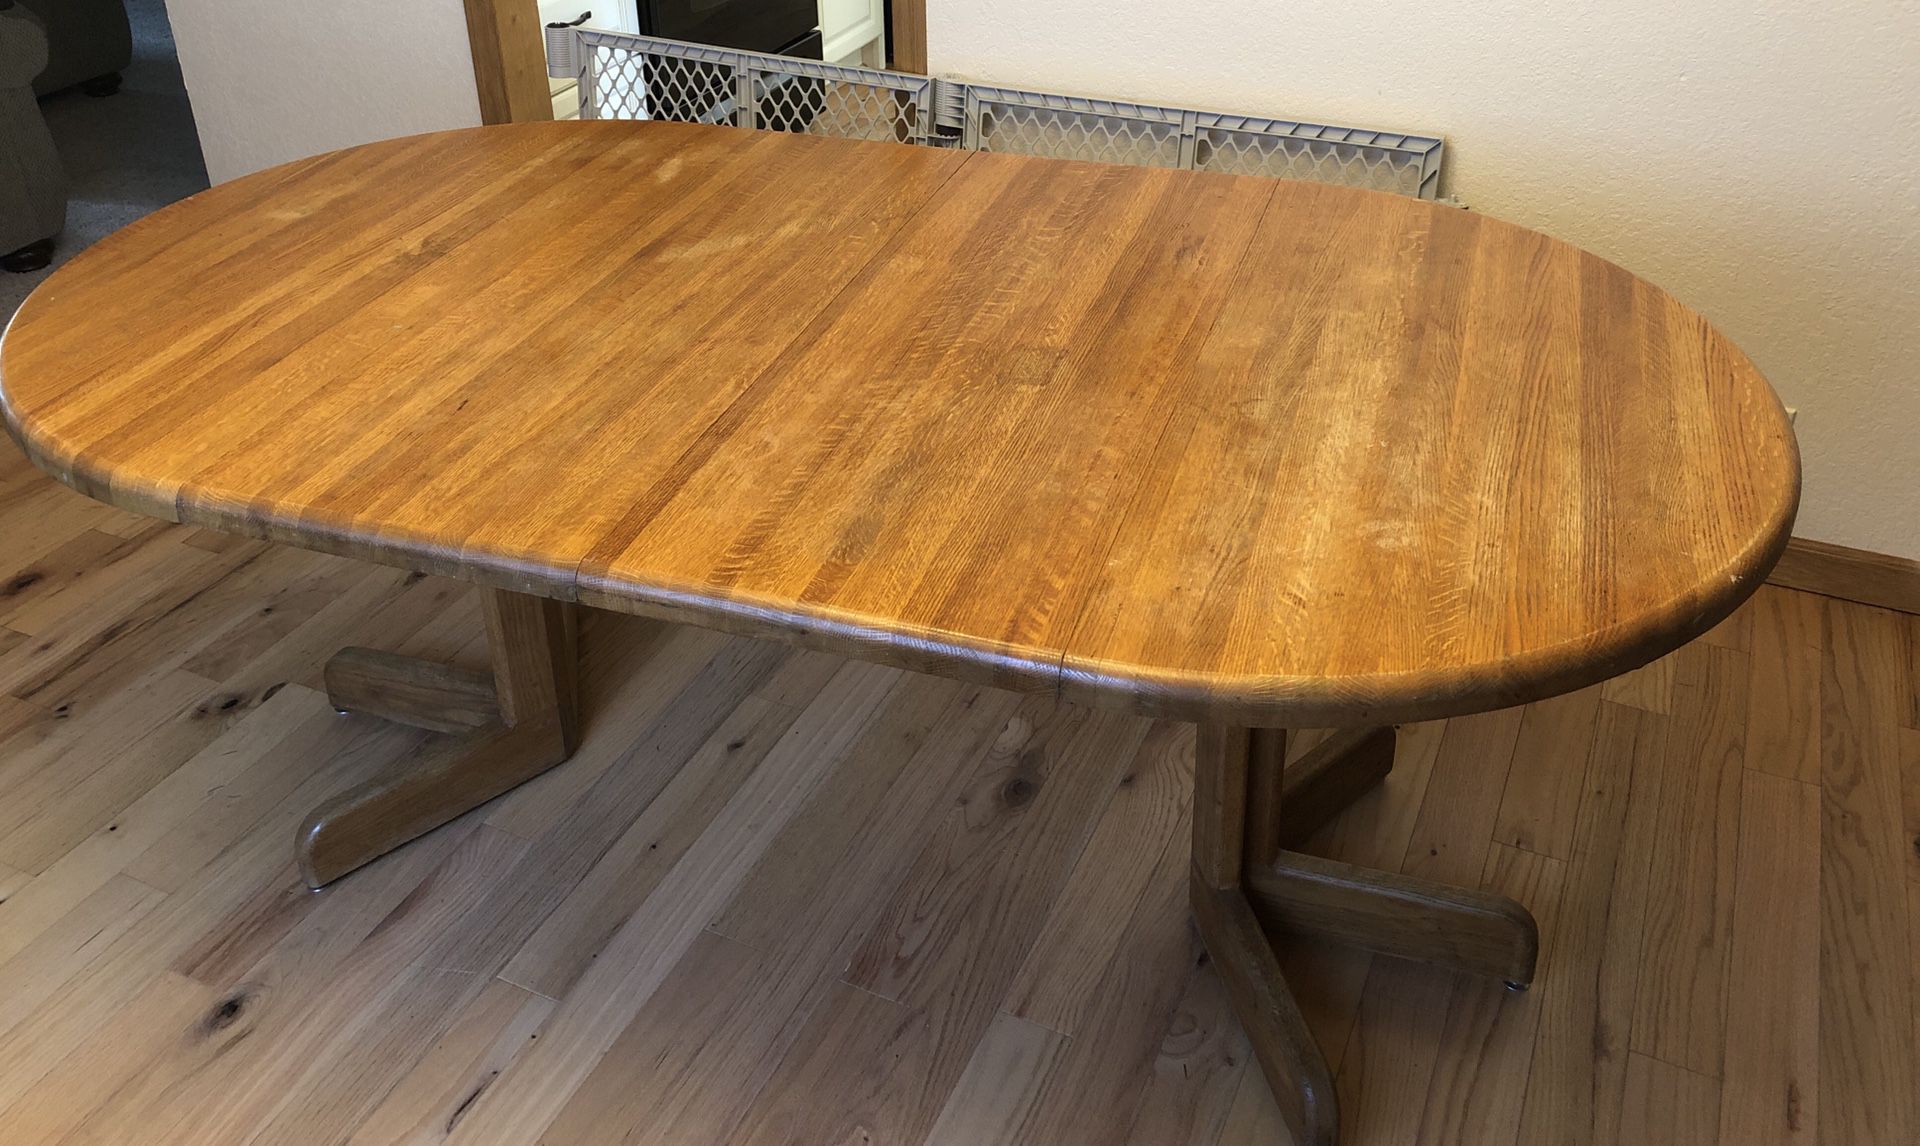 FREE! Oak dining table, 2 leafs, 5 chairs